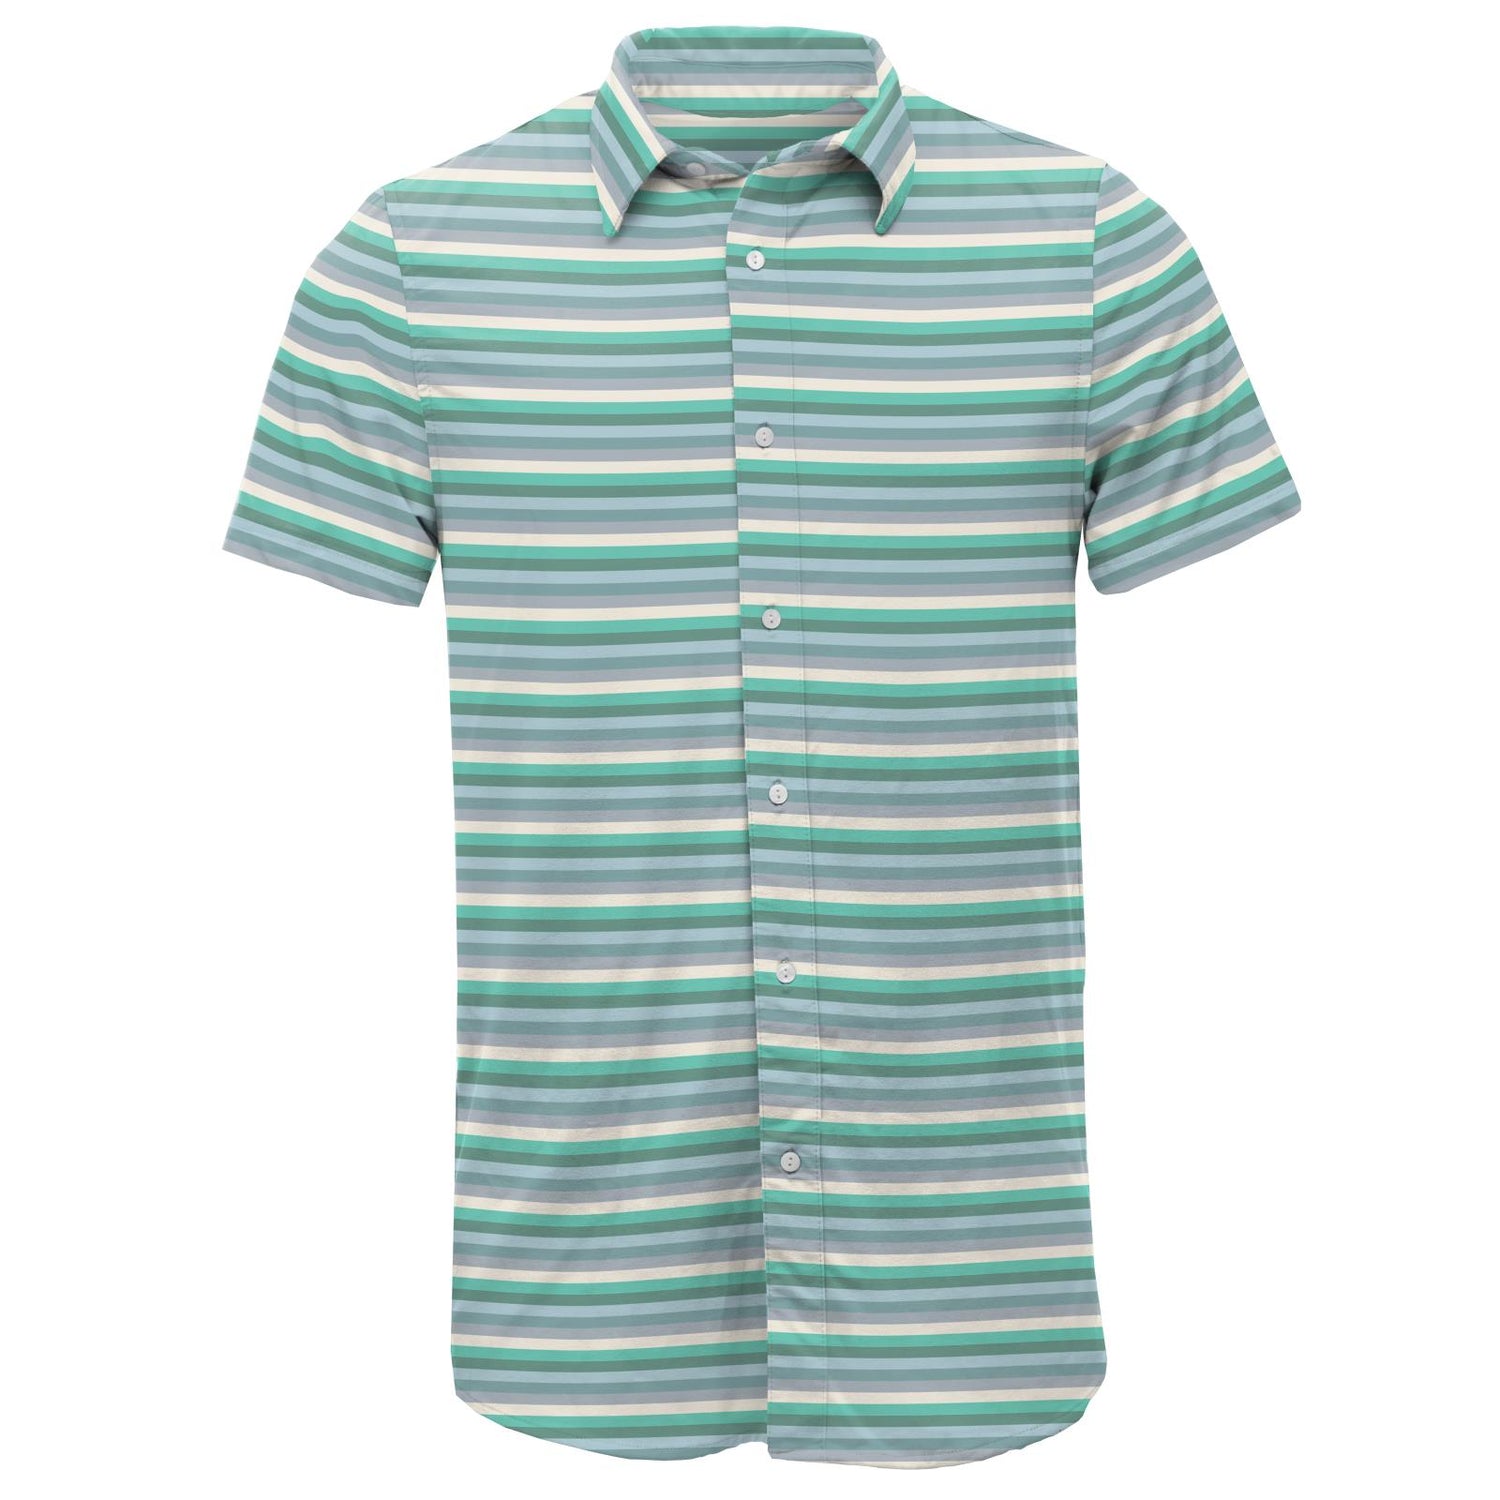 Men's Print Short Sleeve Luxe Jersey Button Down Shirt in April Showers Stripe